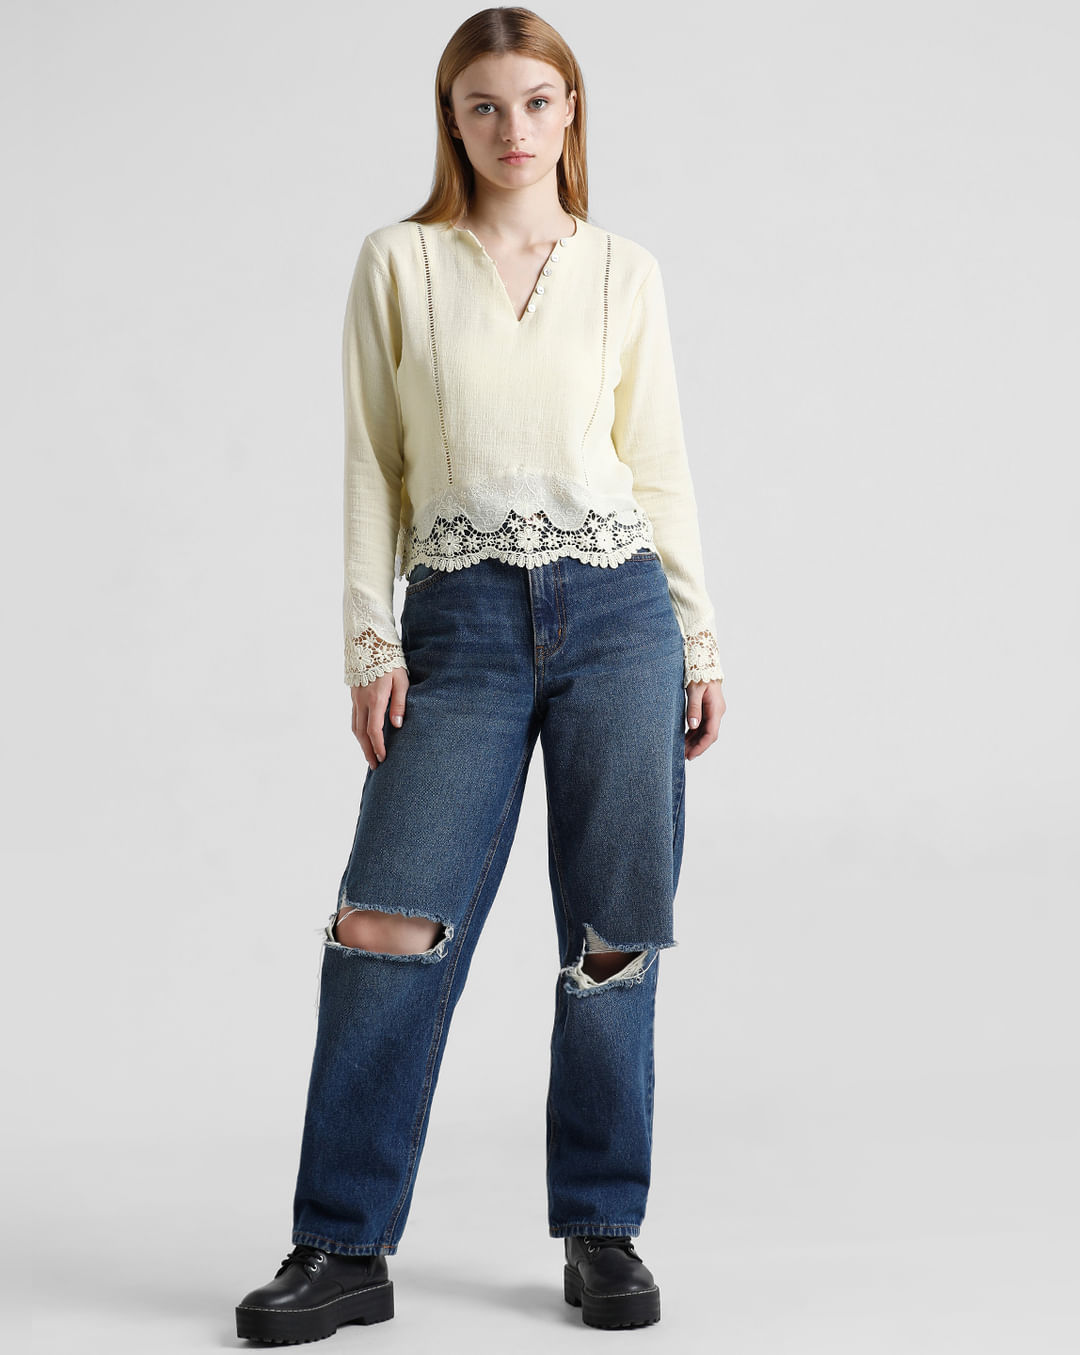 Yellow Lace Trim Top